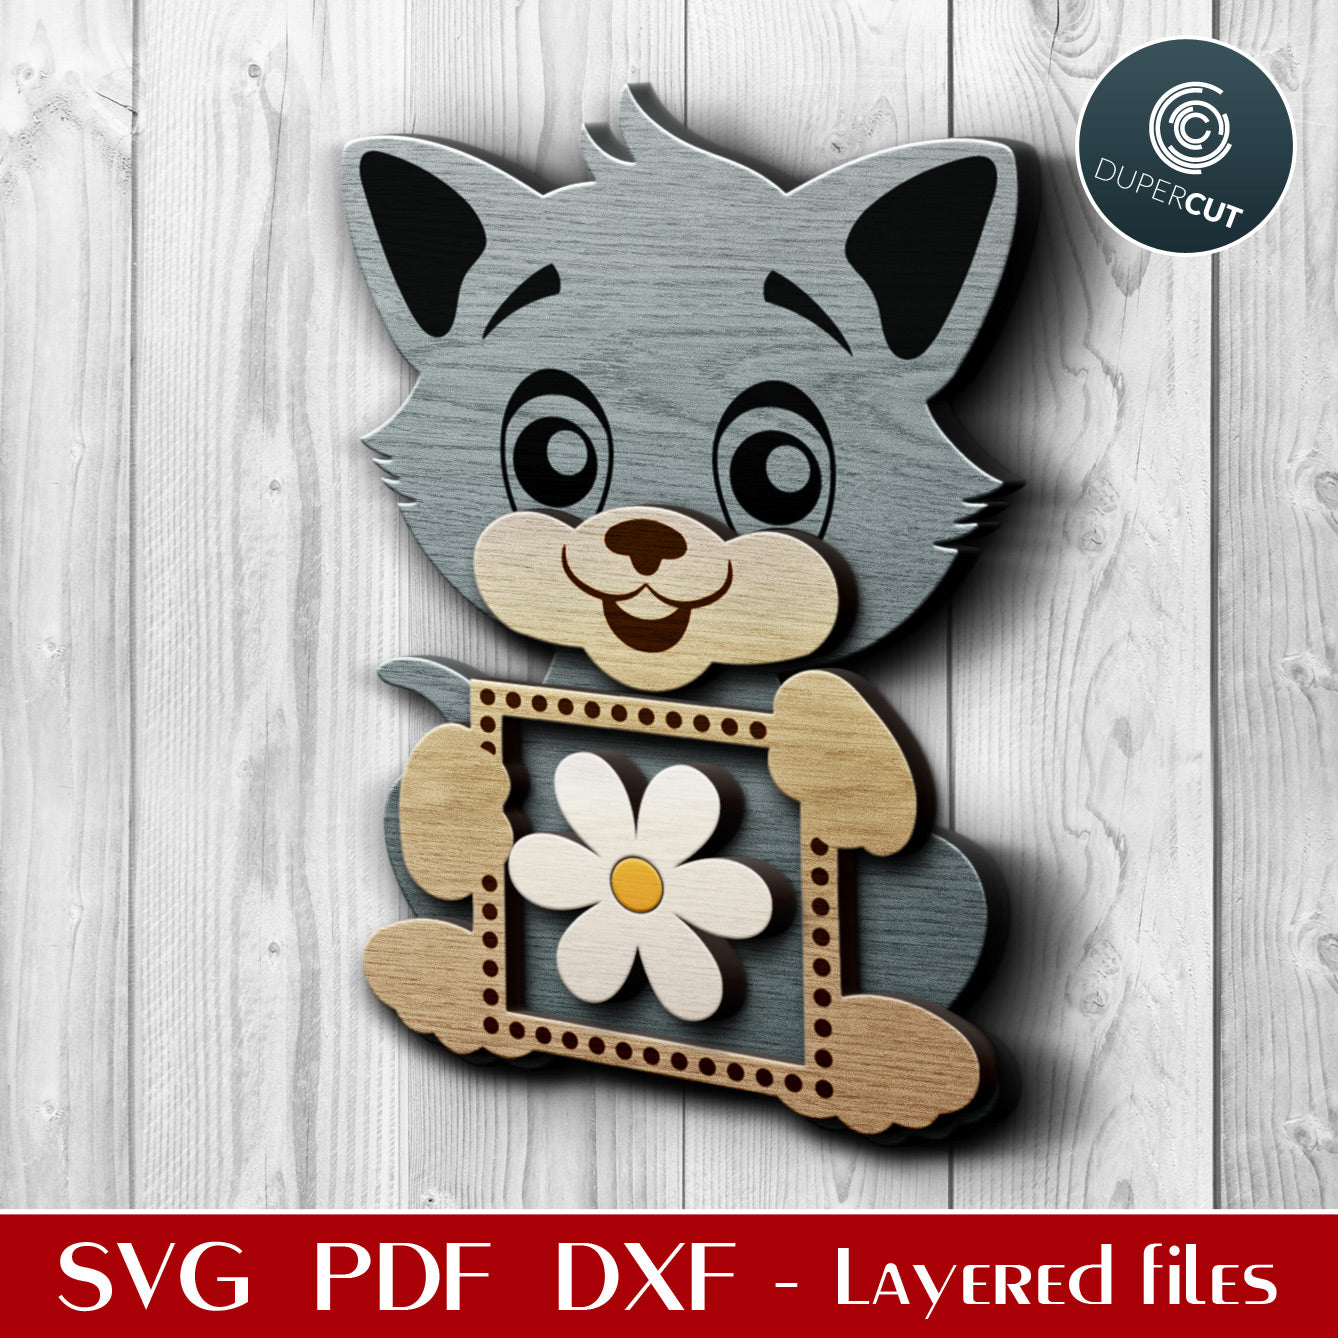 Mother's day gift Kitten with flower - Layered laser cutting files - SVG PDF vector template for Glowforge, Cricut, Silhouette Cameo, CNC plasma machines 